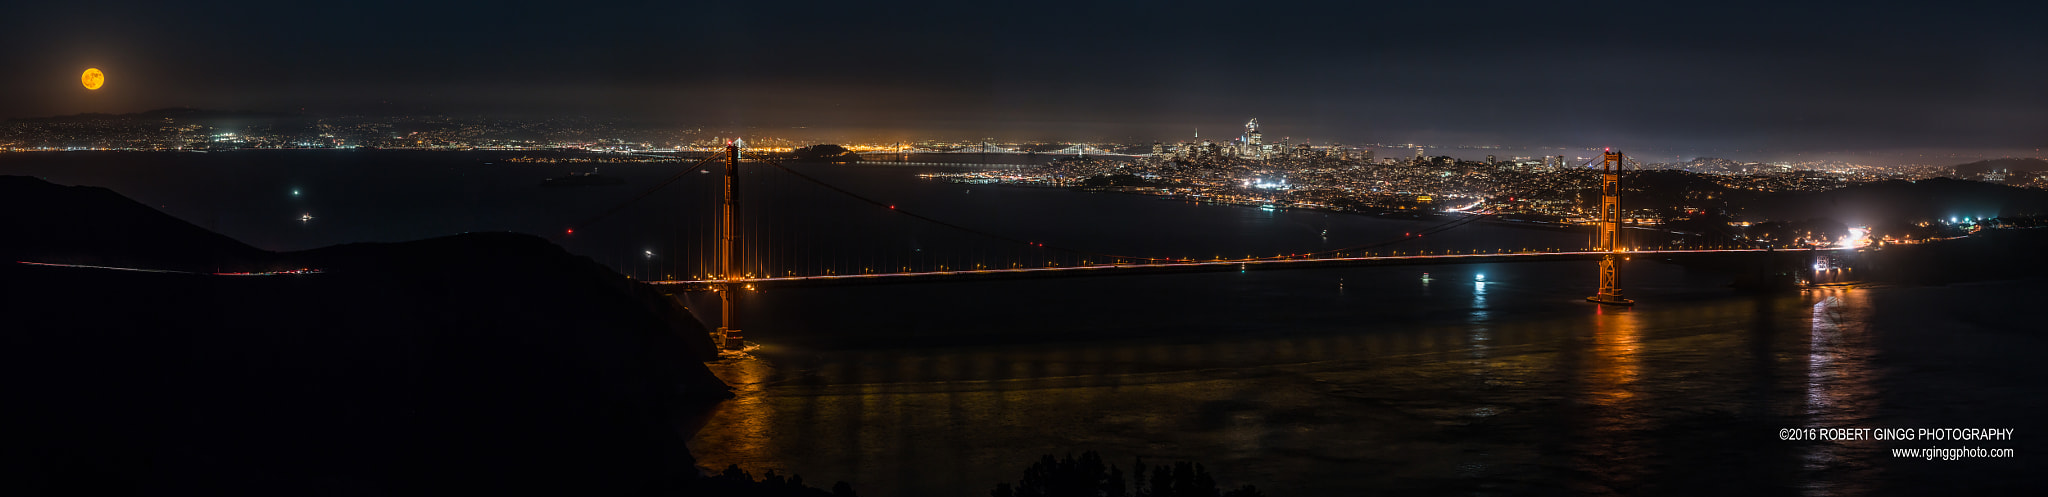 Sony a7R II sample photo. Super moon over san fransisco bay photography